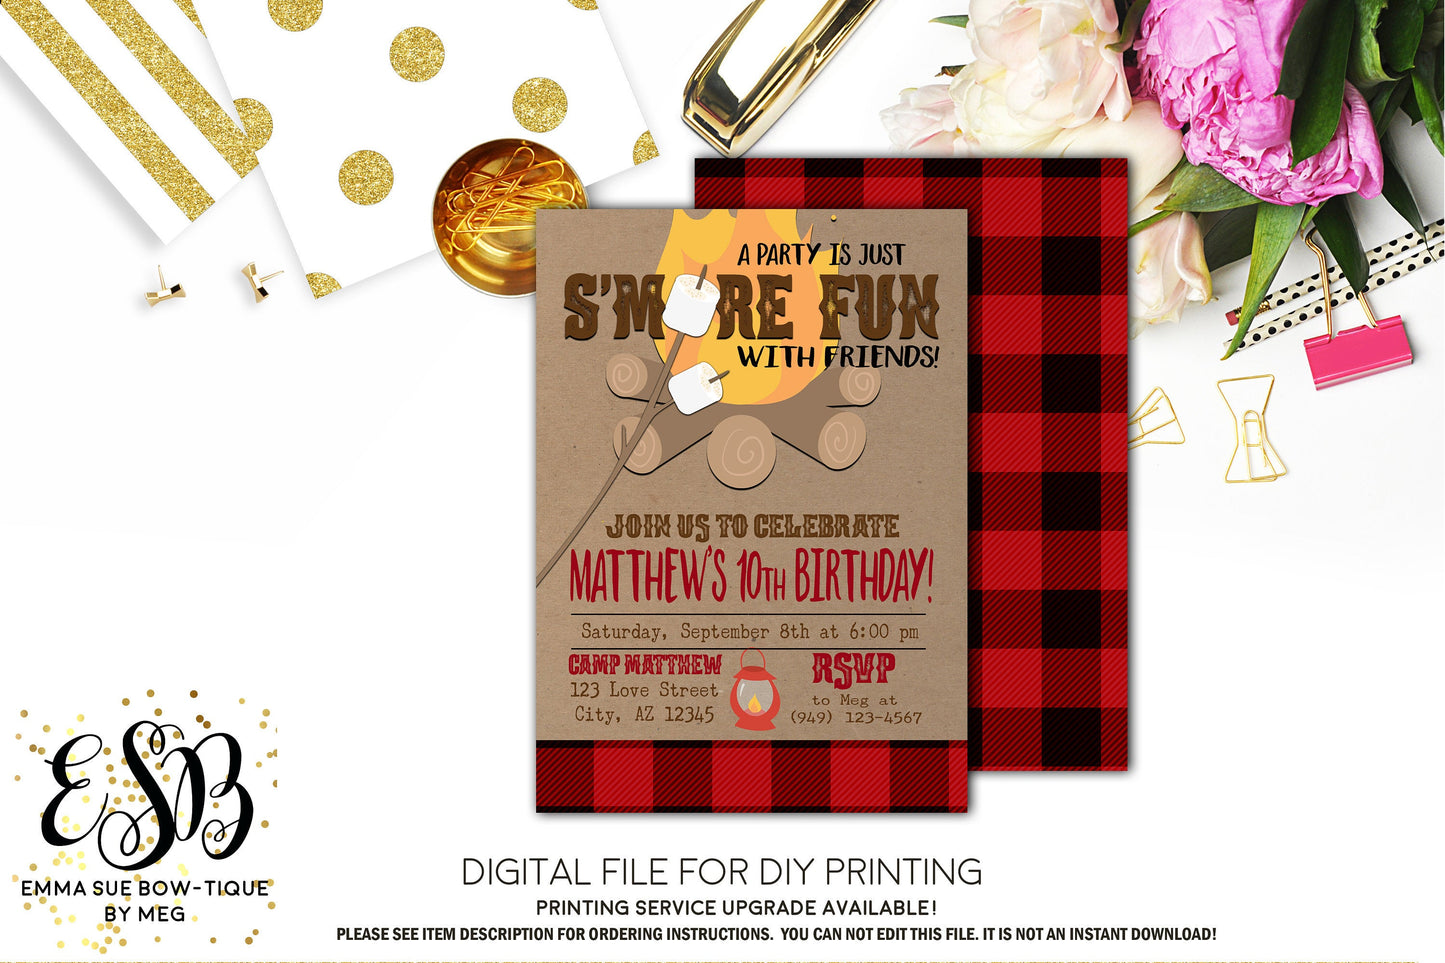 A party is just S'more Fun with Friends Buffalo Plaid Birthday Party invitation Printable - Digital File  (smore-marshmellow)